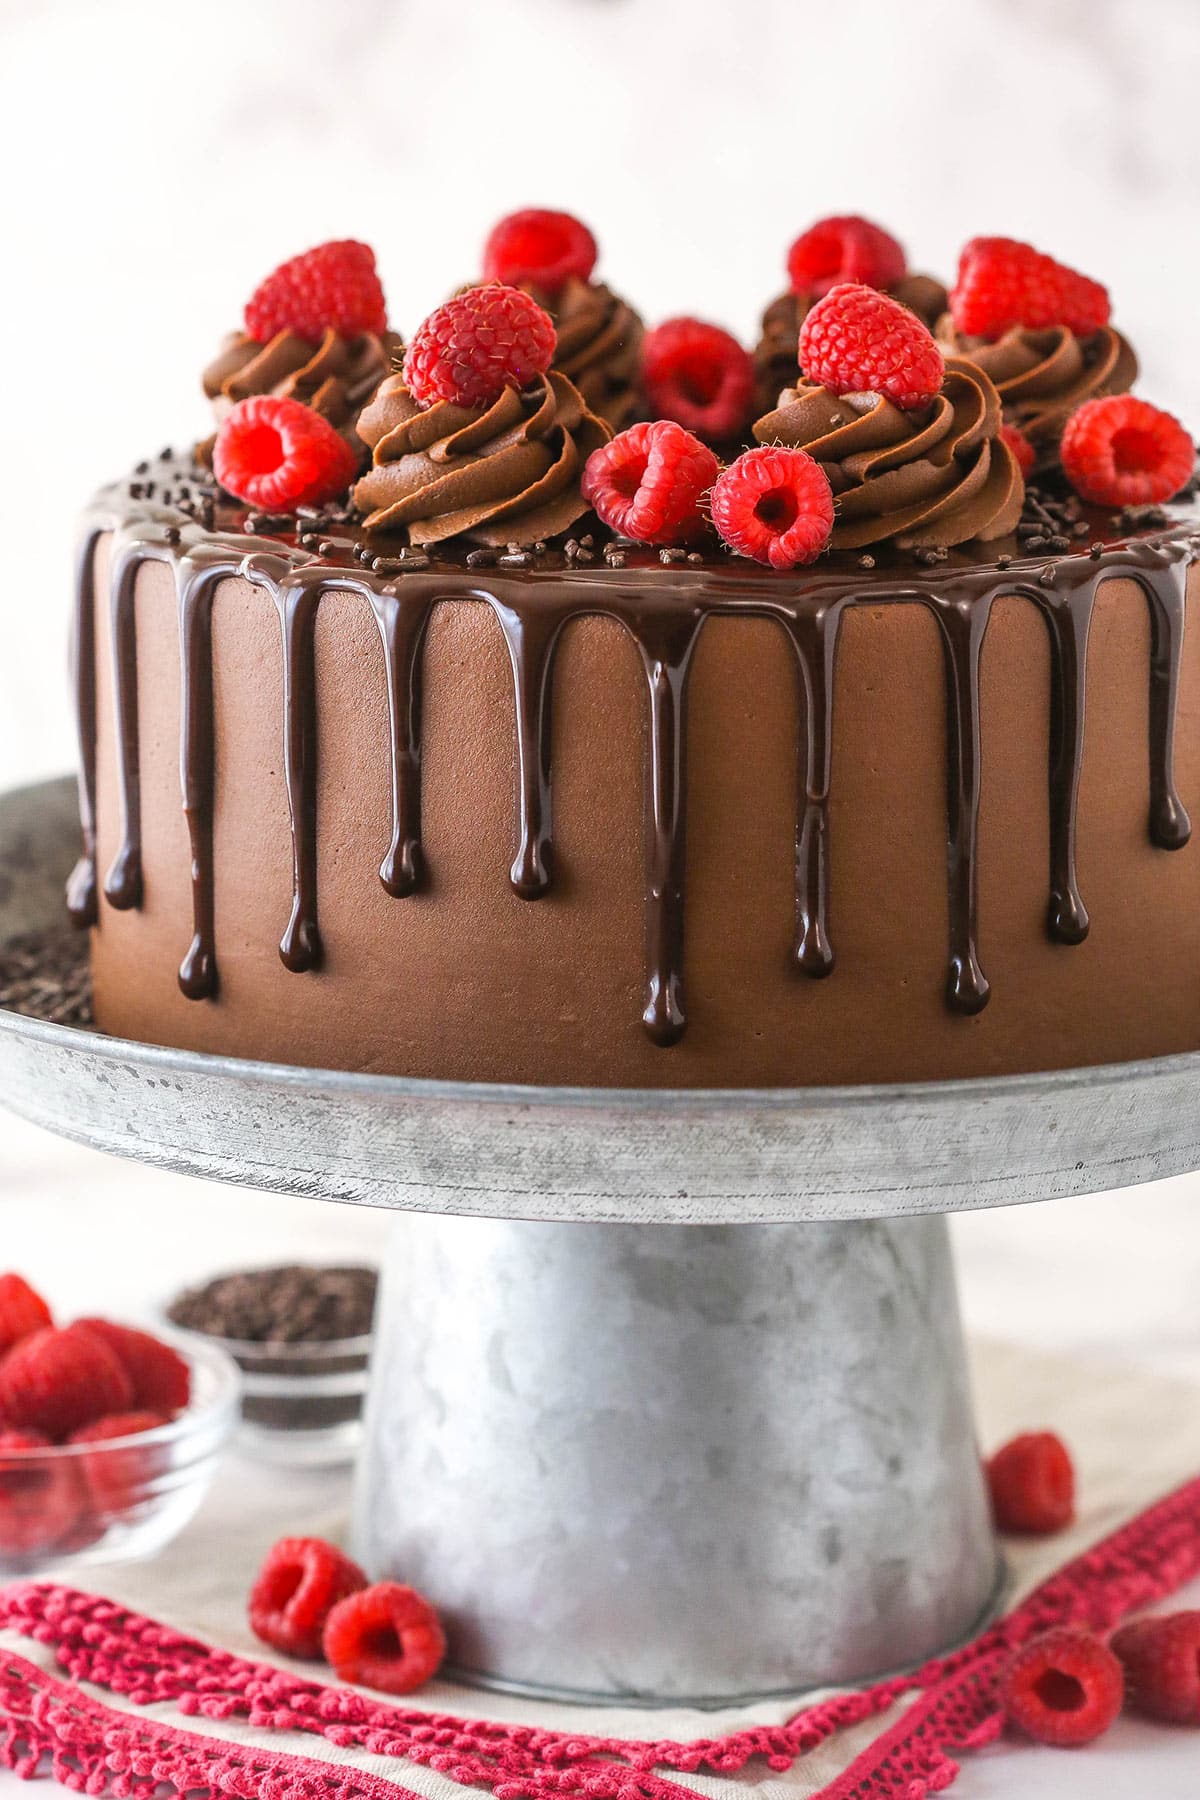 A whole raspberry chocolate take on a cake stand surrounded by fresh raspberries.